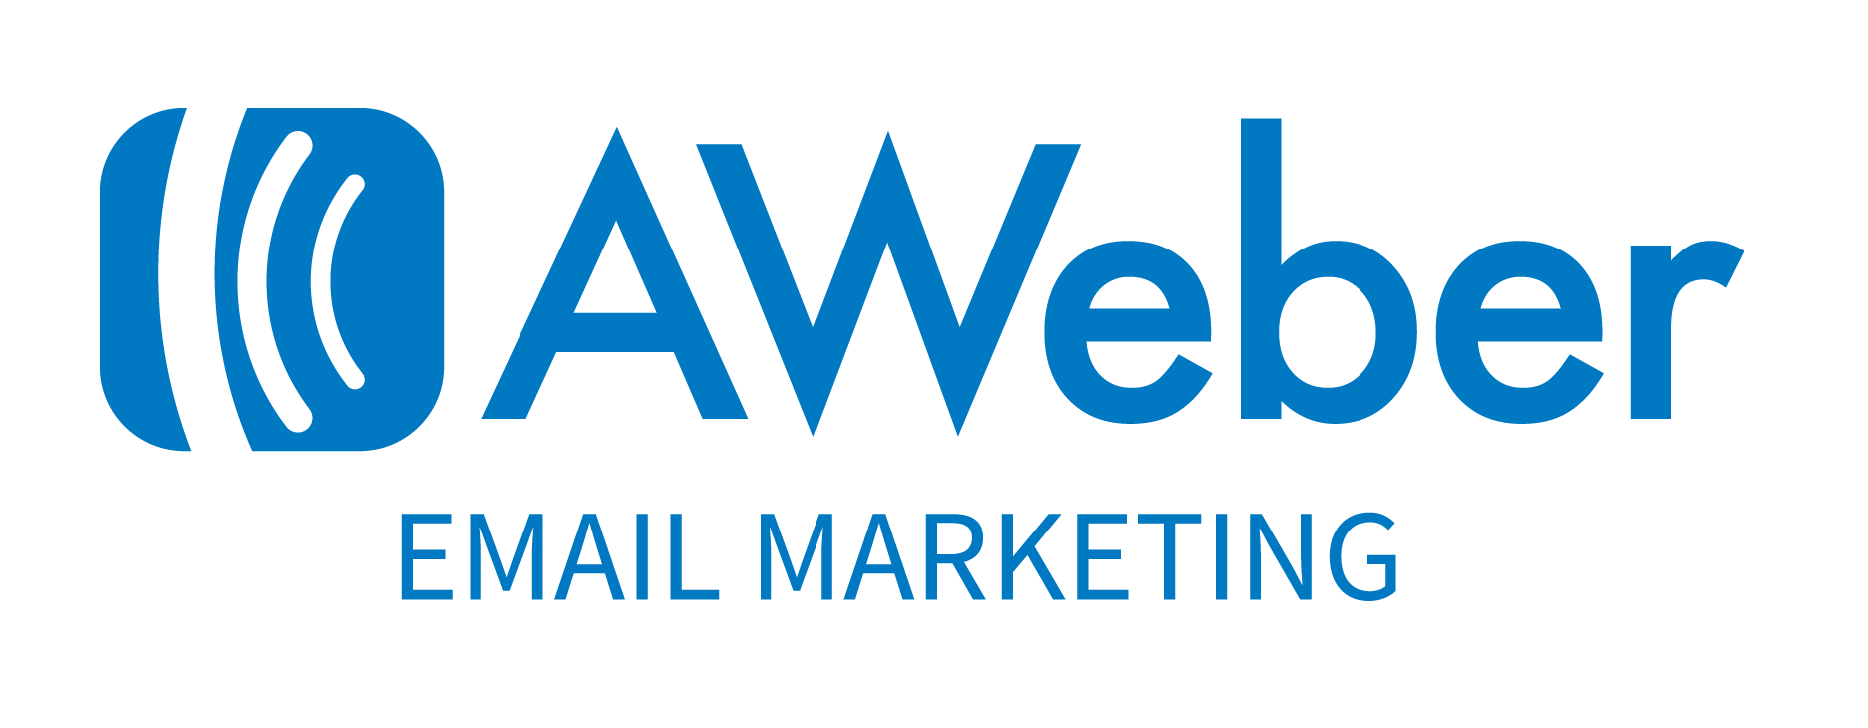 2019 Email Marketing Software